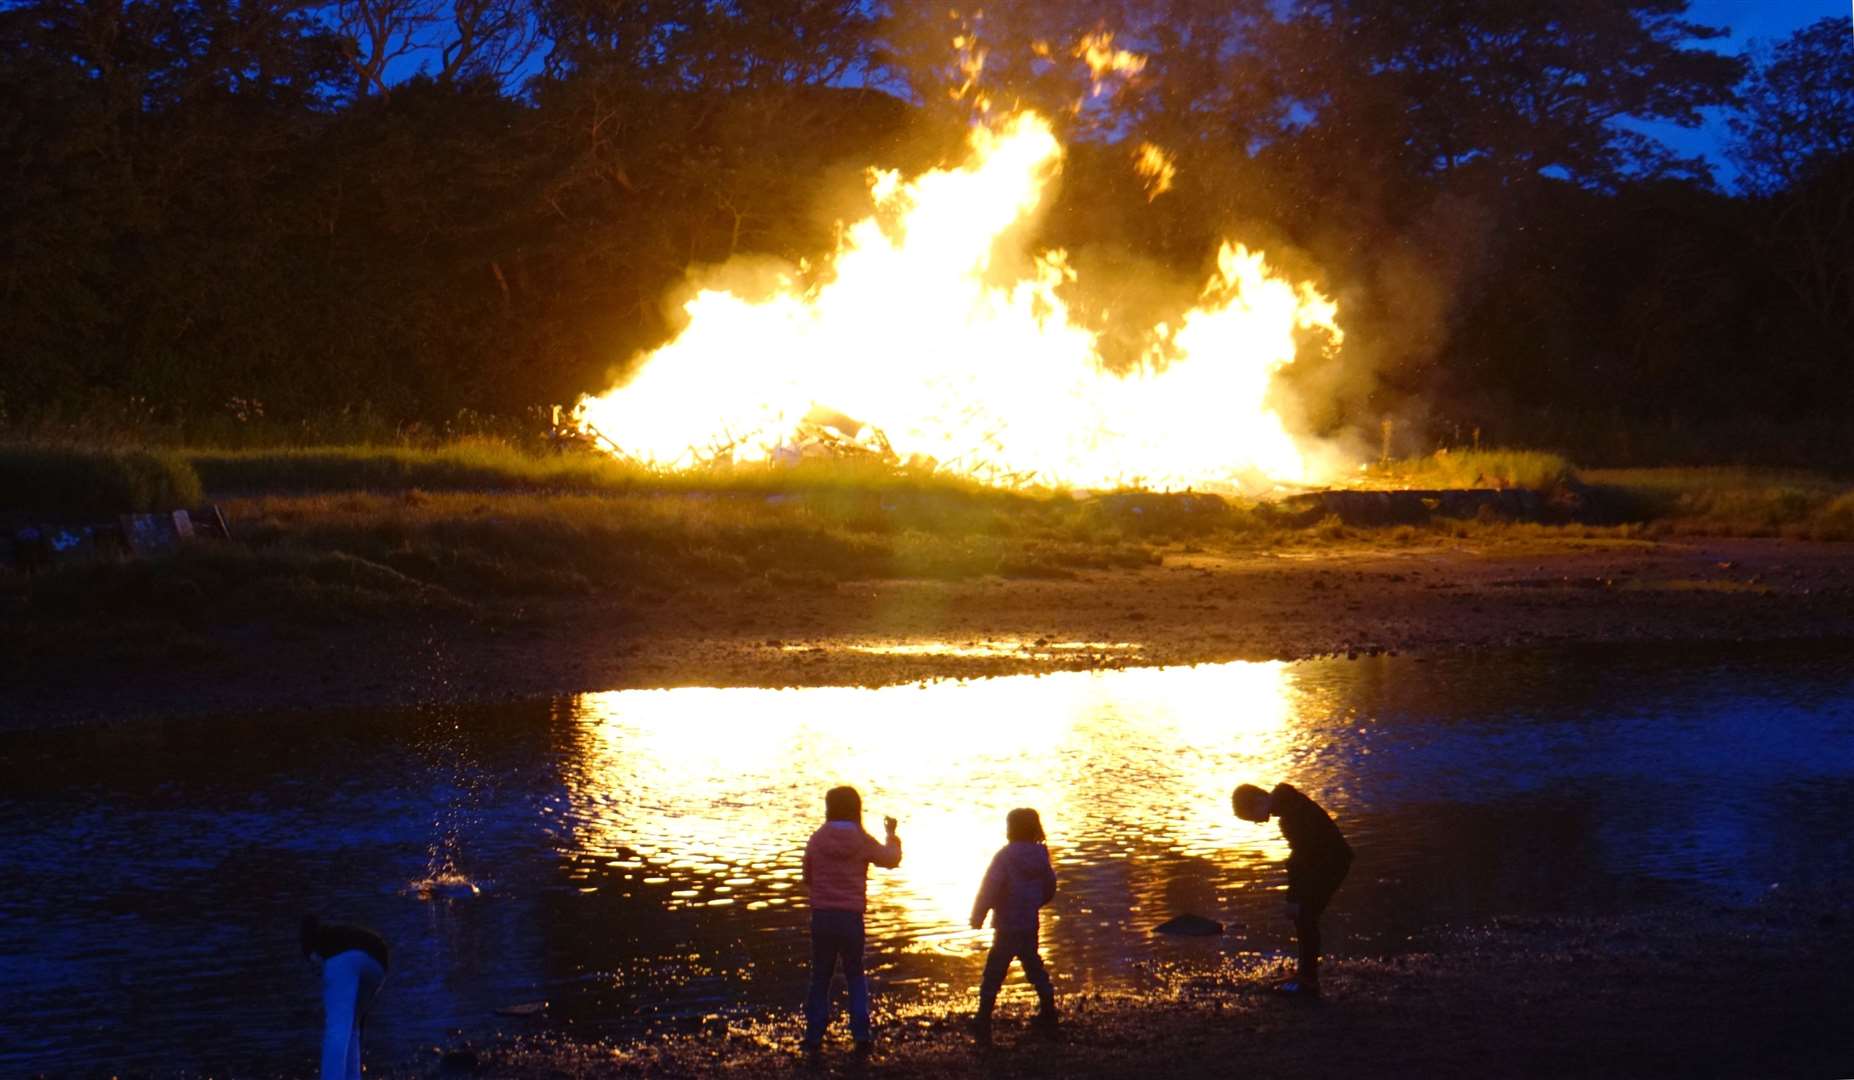 Children played by the river in the light of the bonfire. Pictures: DGS